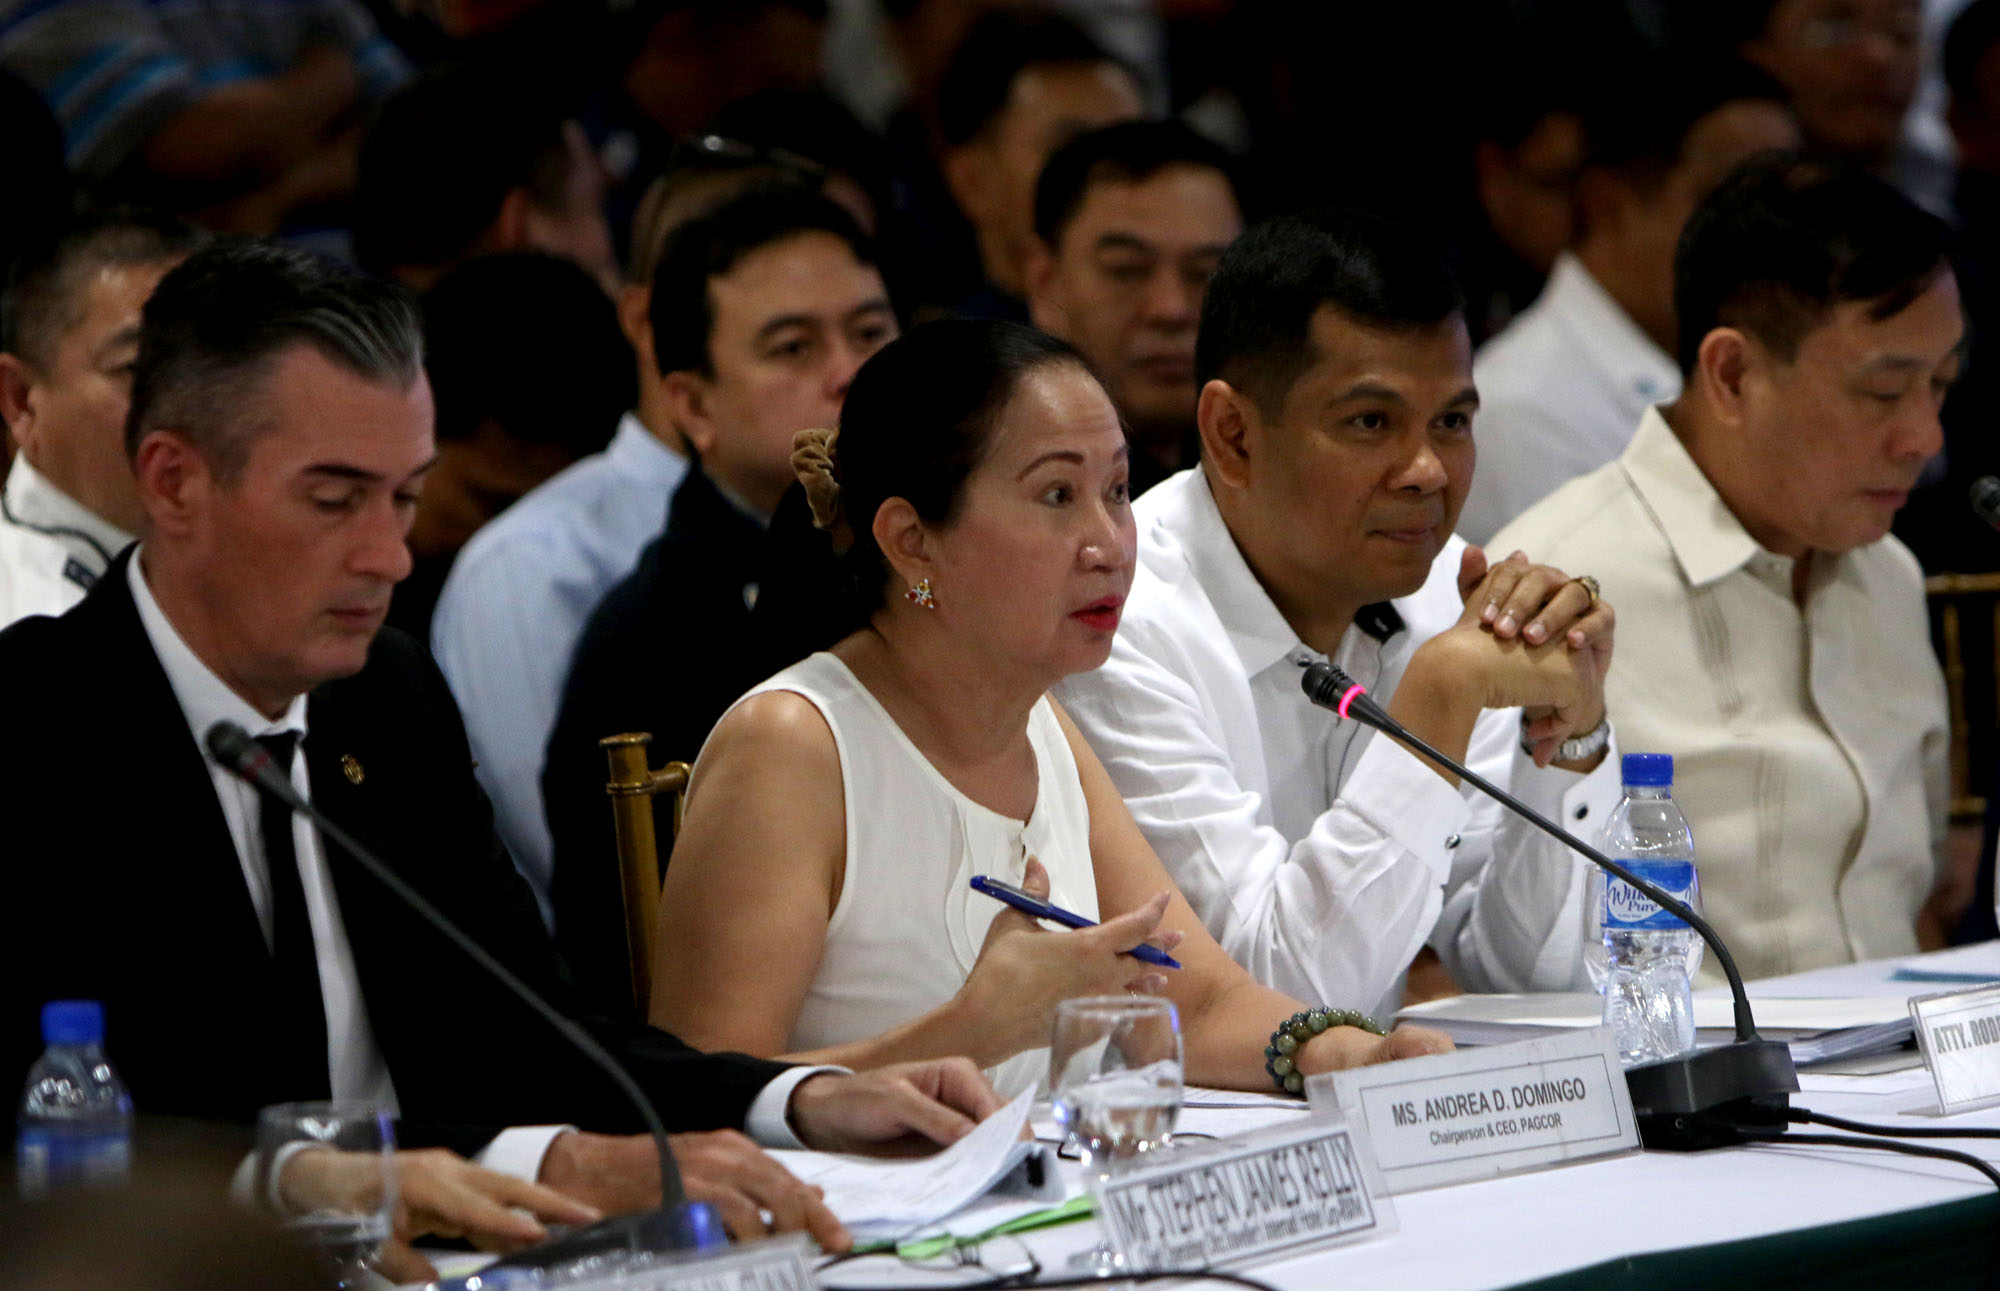 PAGCOR'S SIDE. Pagcor chairperson Andrea Domingo answers lawmakers' queries during the congressional inquiry. Photo by Inoue Jaena/Rappler   